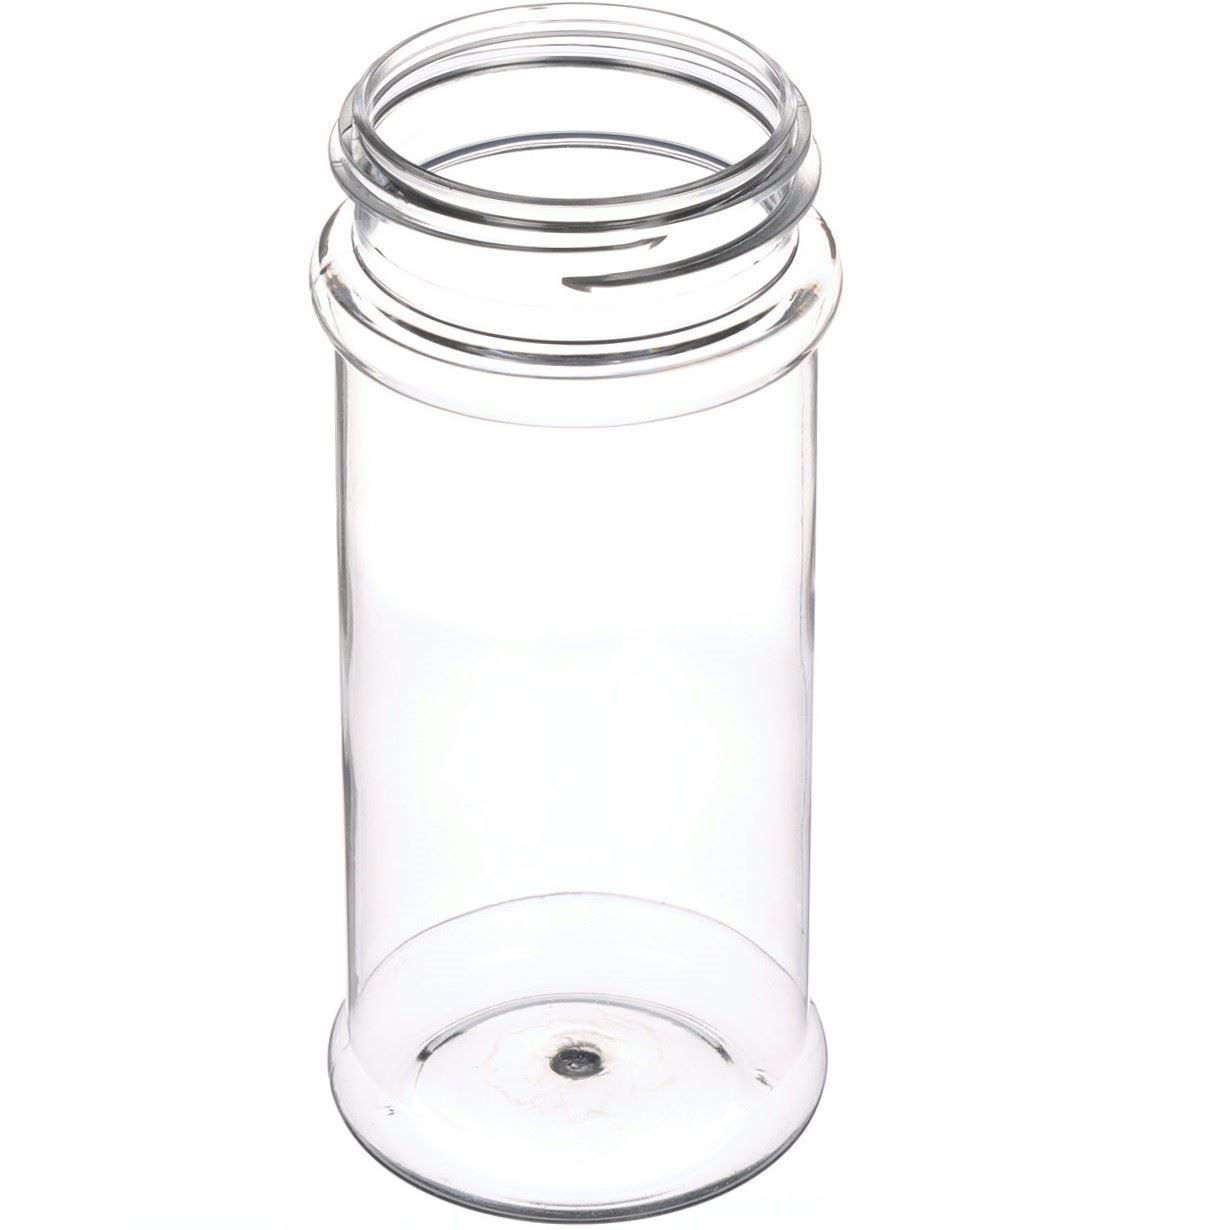 https://tricorbraun.ca/content/images/thumbs/0015077_84-oz-clear-pet-spice-jar-53-485-neck-finish-round-base.jpeg